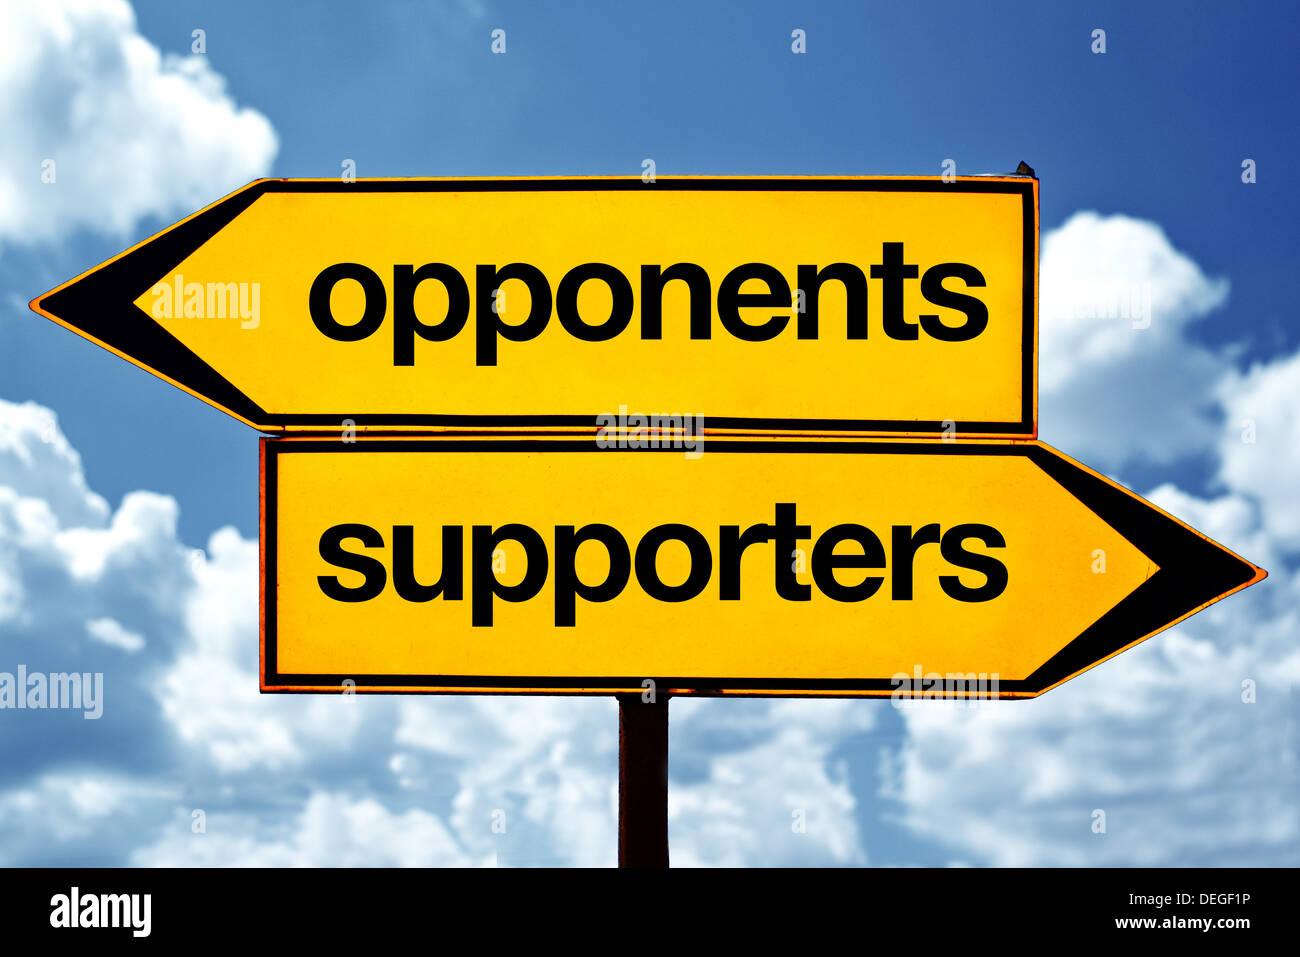 Opponents or supporters opposite signs. Two opposite road signs against blue sky background. Stock Photo